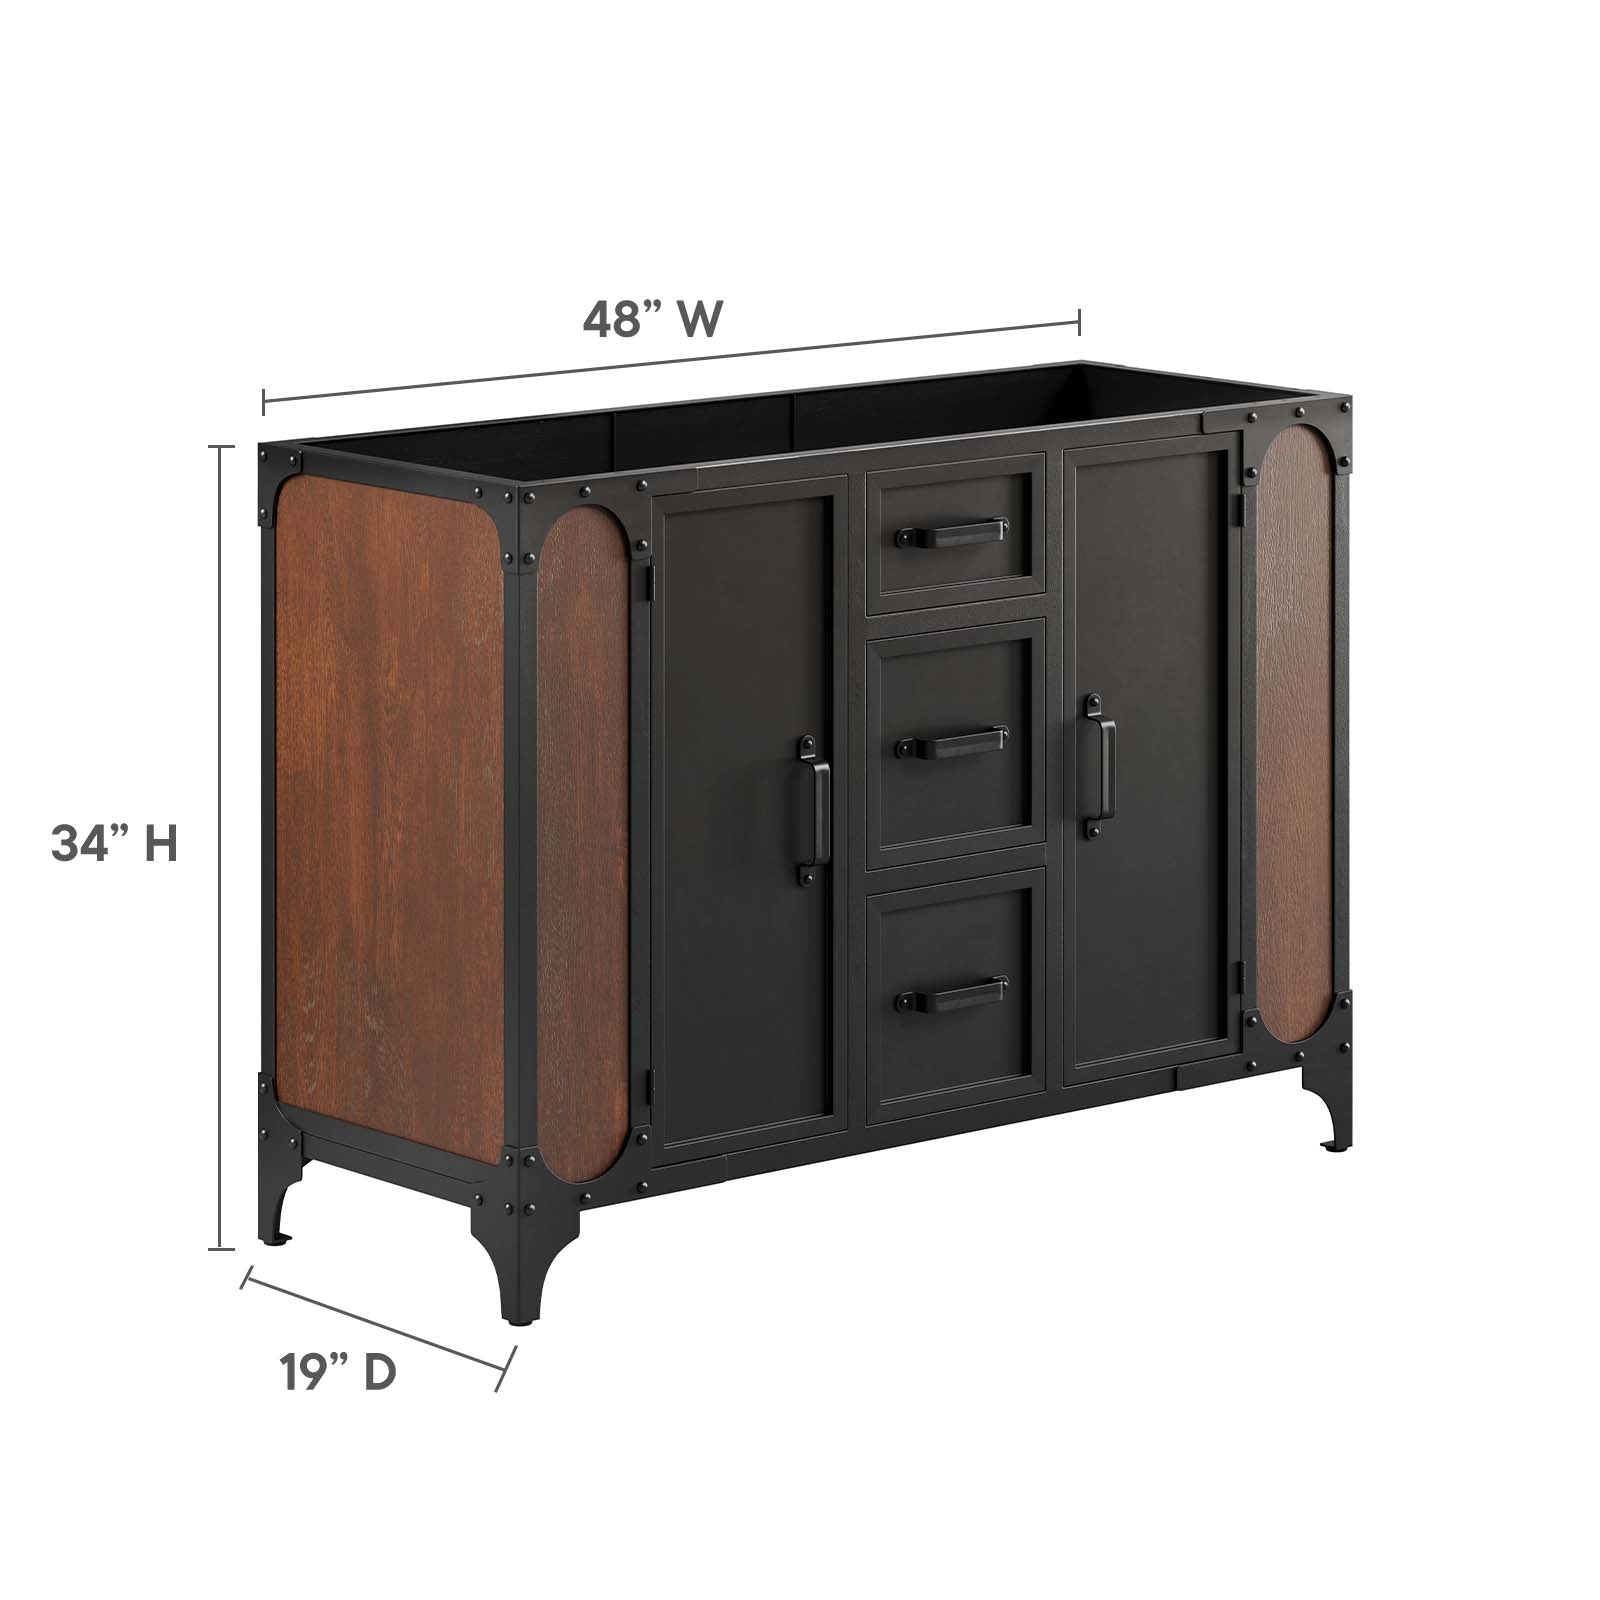 Steamforge 48" Bathroom Vanity Cabinet (Sink Basin Not Included) By Modway - EEI-6130 | Bathroom Accessories | Modway - 7